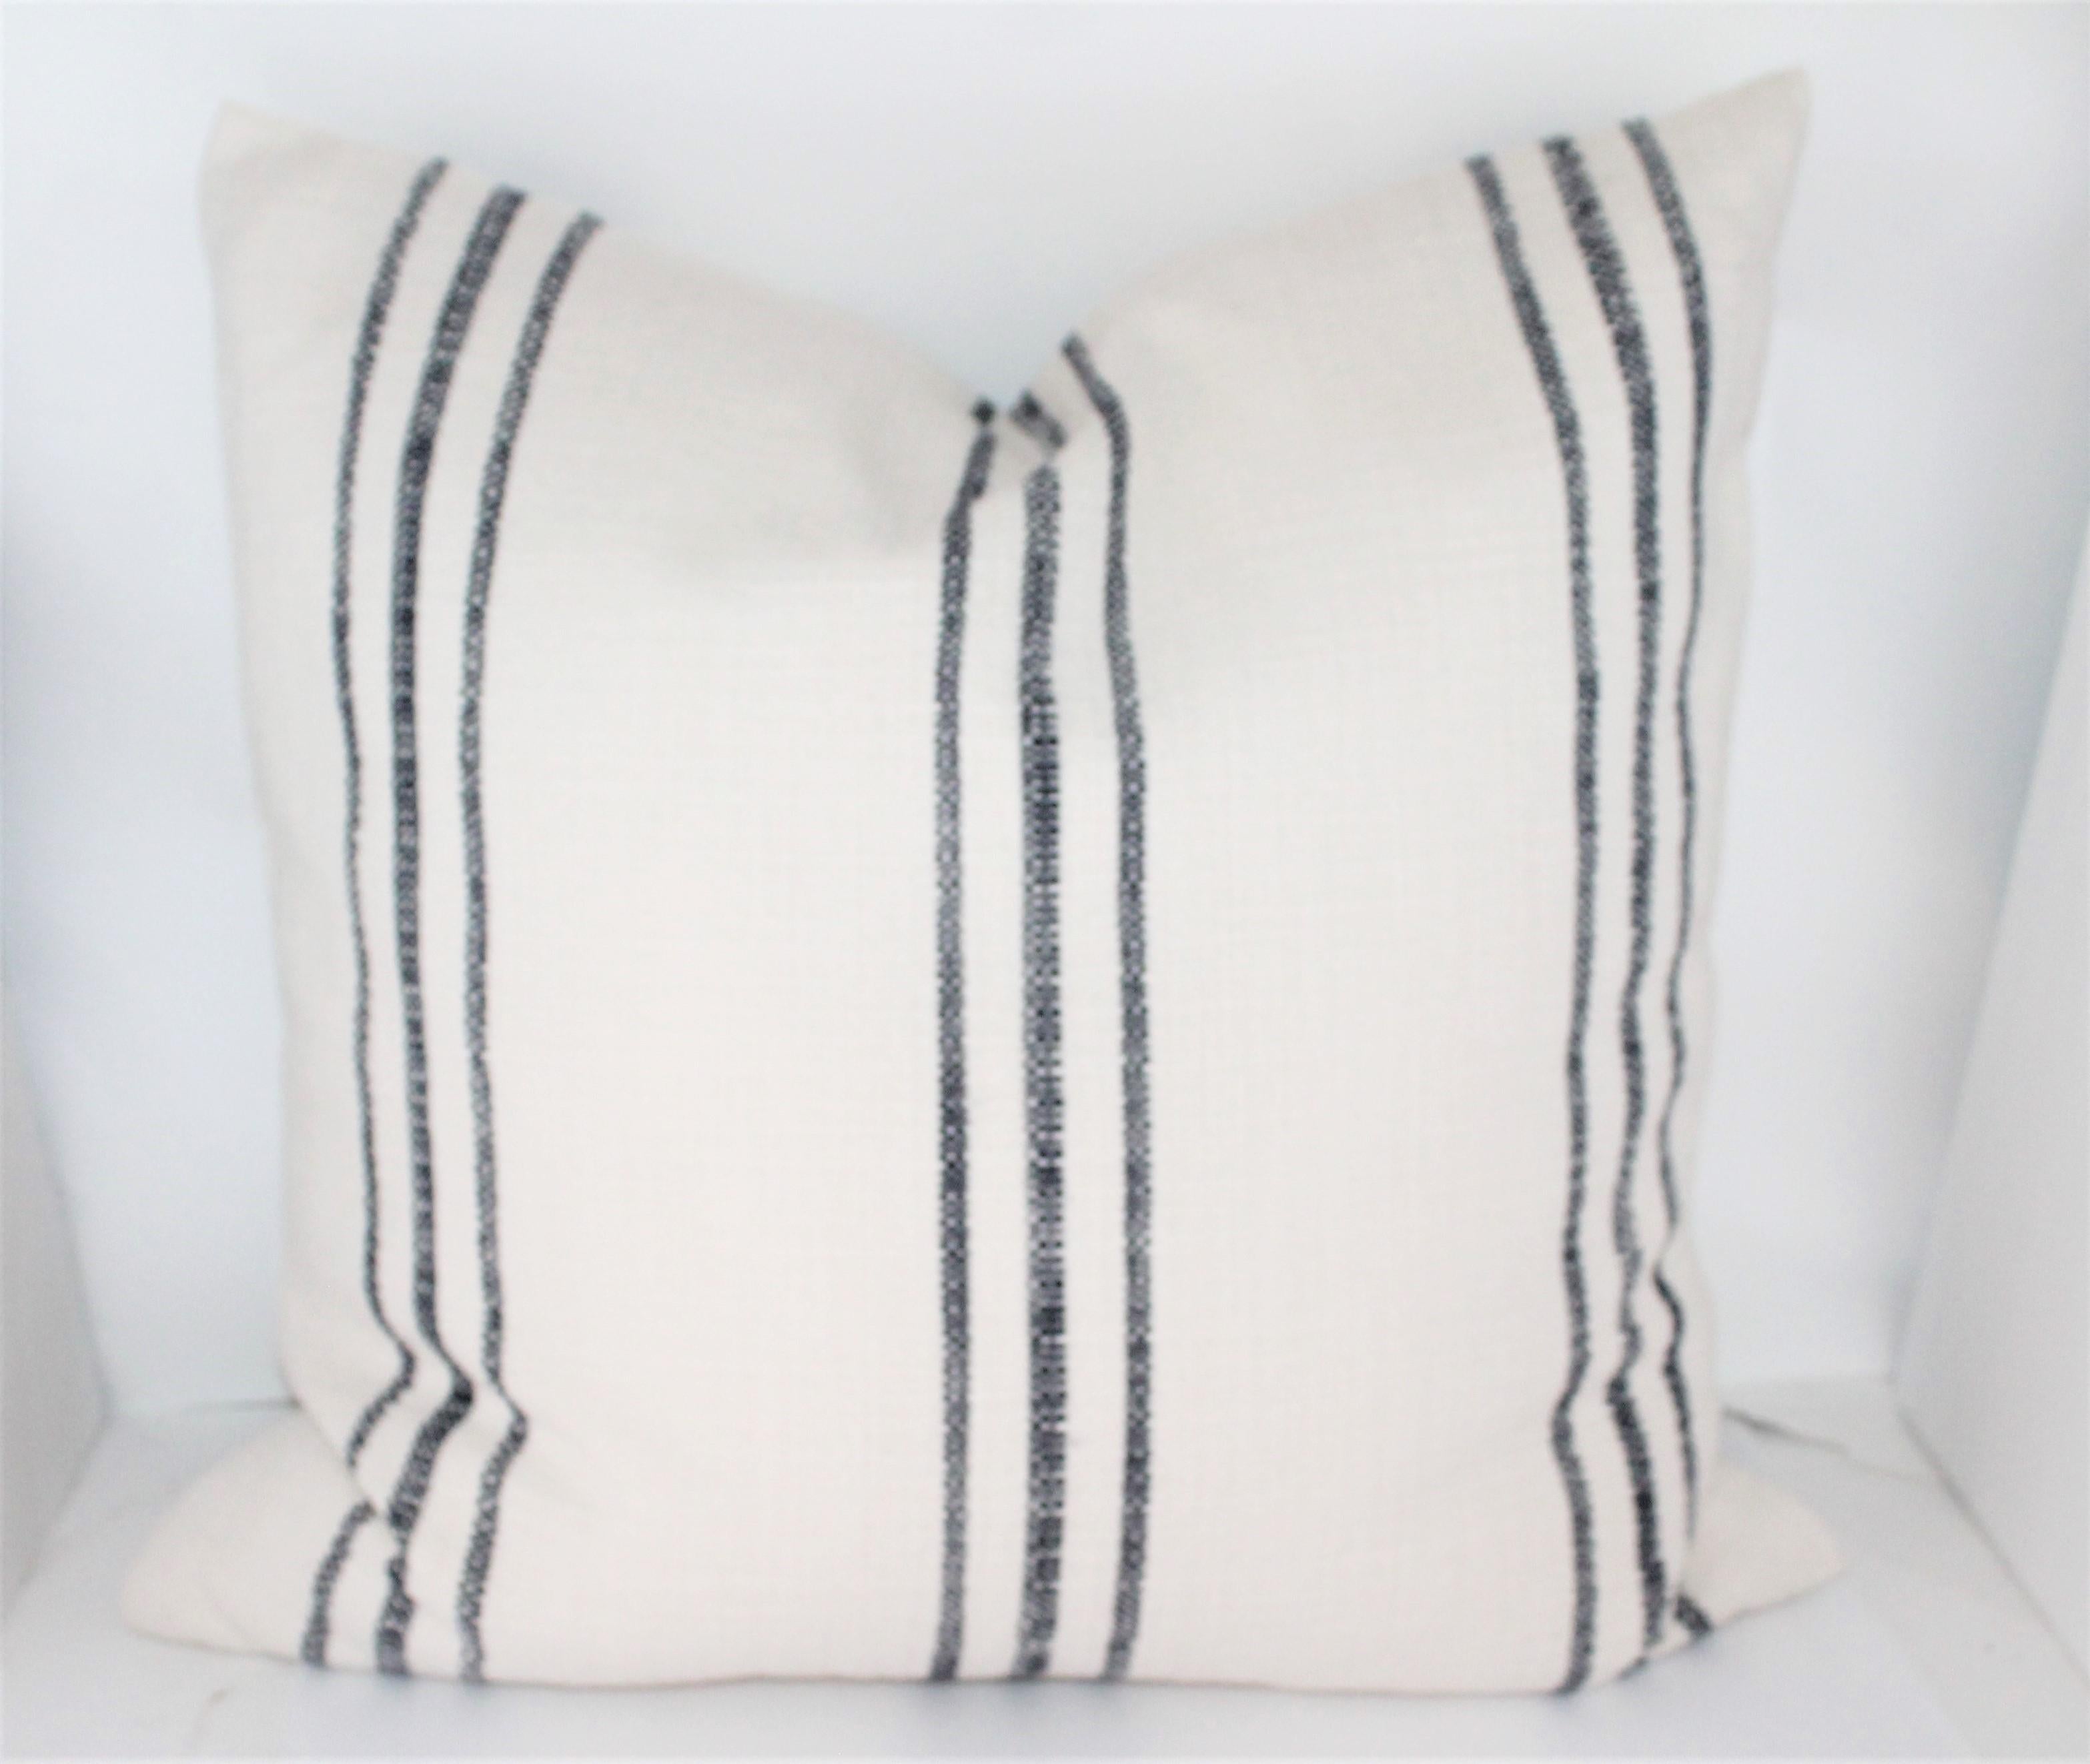 Antique homespun thick soft linen ticking pillows with blue stripes. The condition is pristine. Sold as a pair.